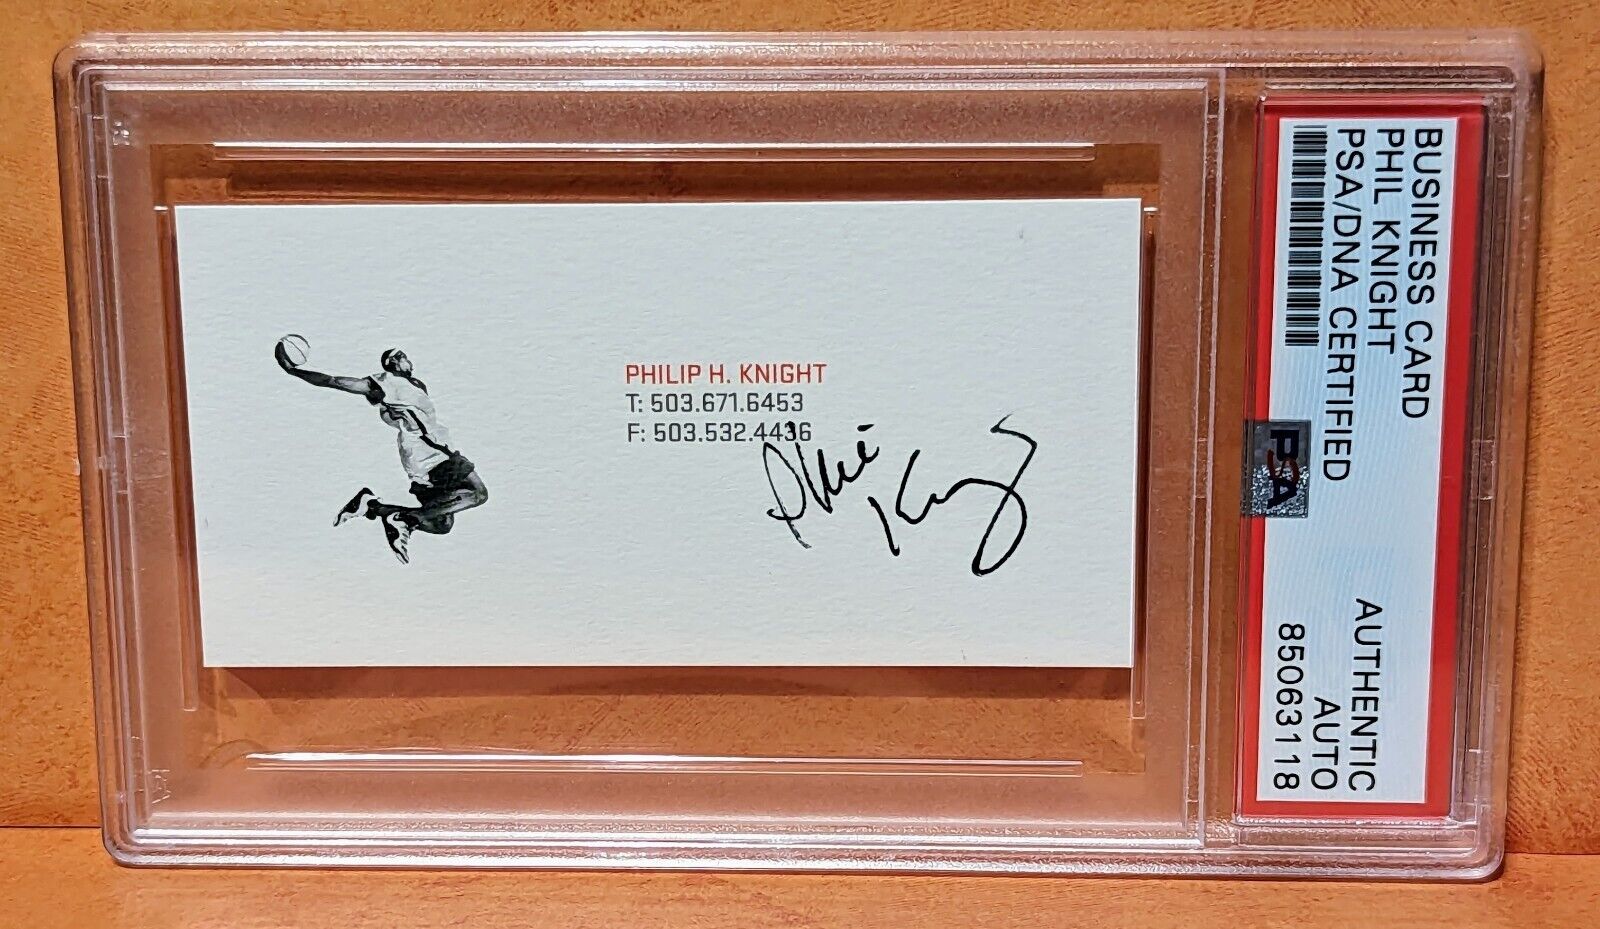 PSA Phil Knight Autograph LeBron James Image Nike Business Card Signed